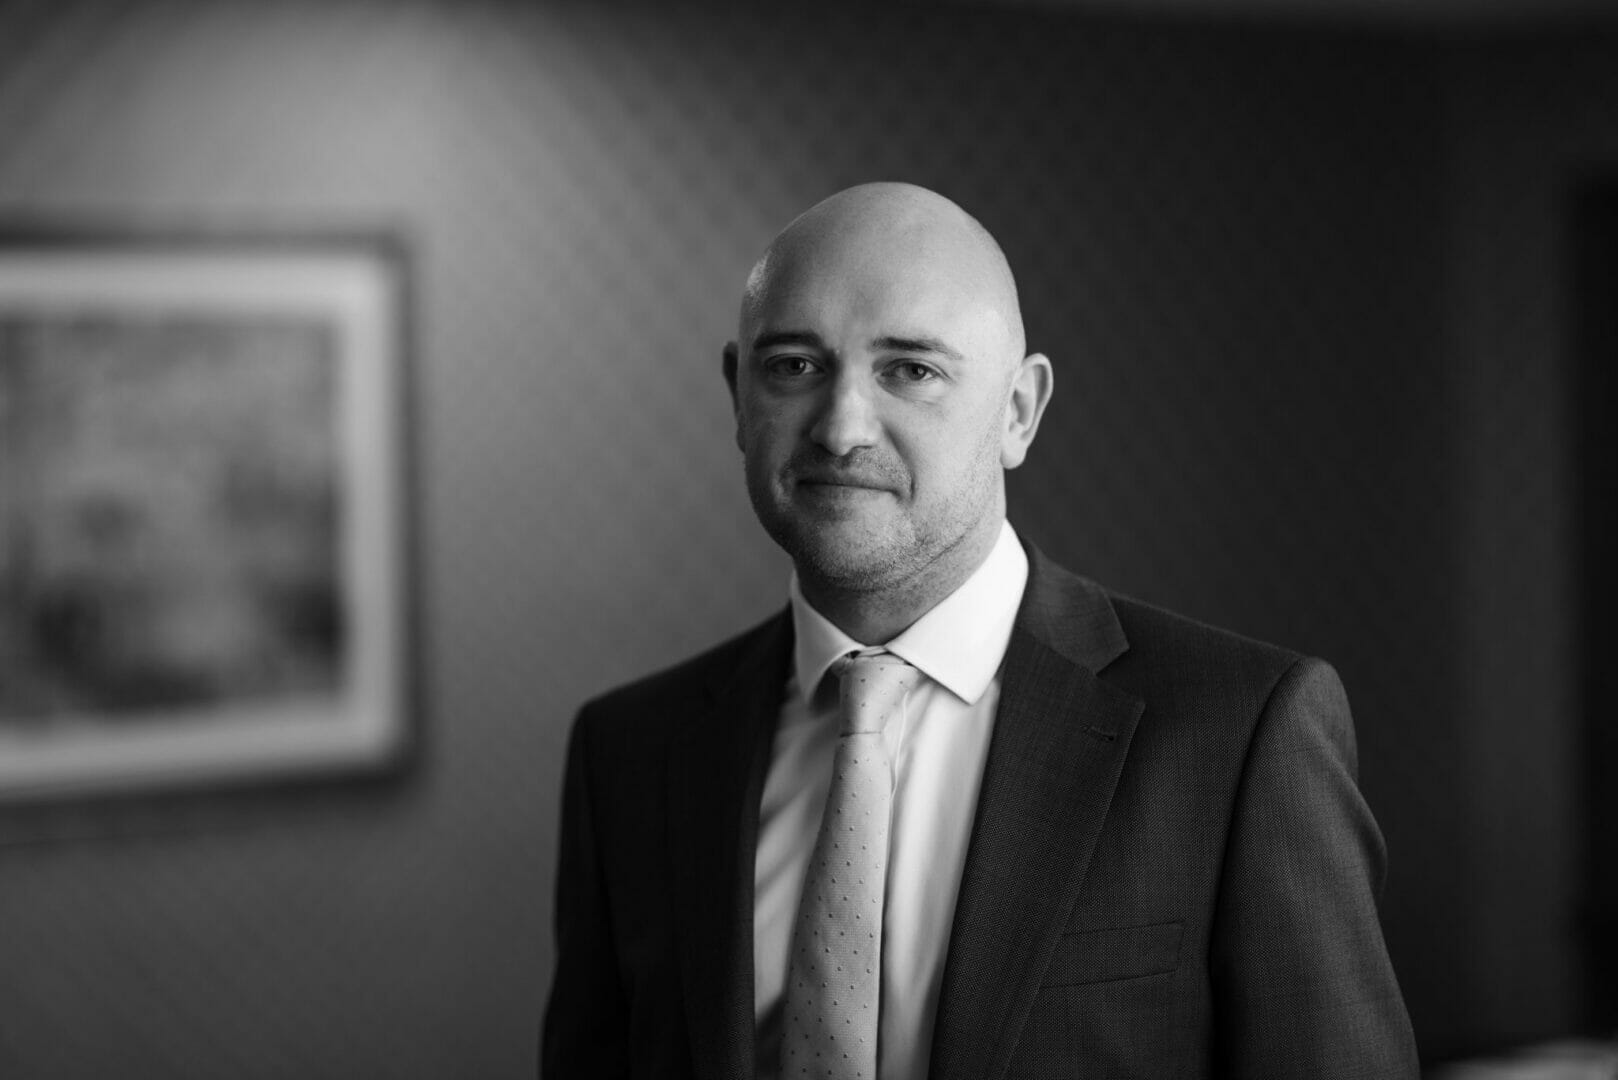 BENJAMIN CHAPMAN PROMOTED TO COMMERCIAL DIRECTOR AT STRAND PALACE HOTEL